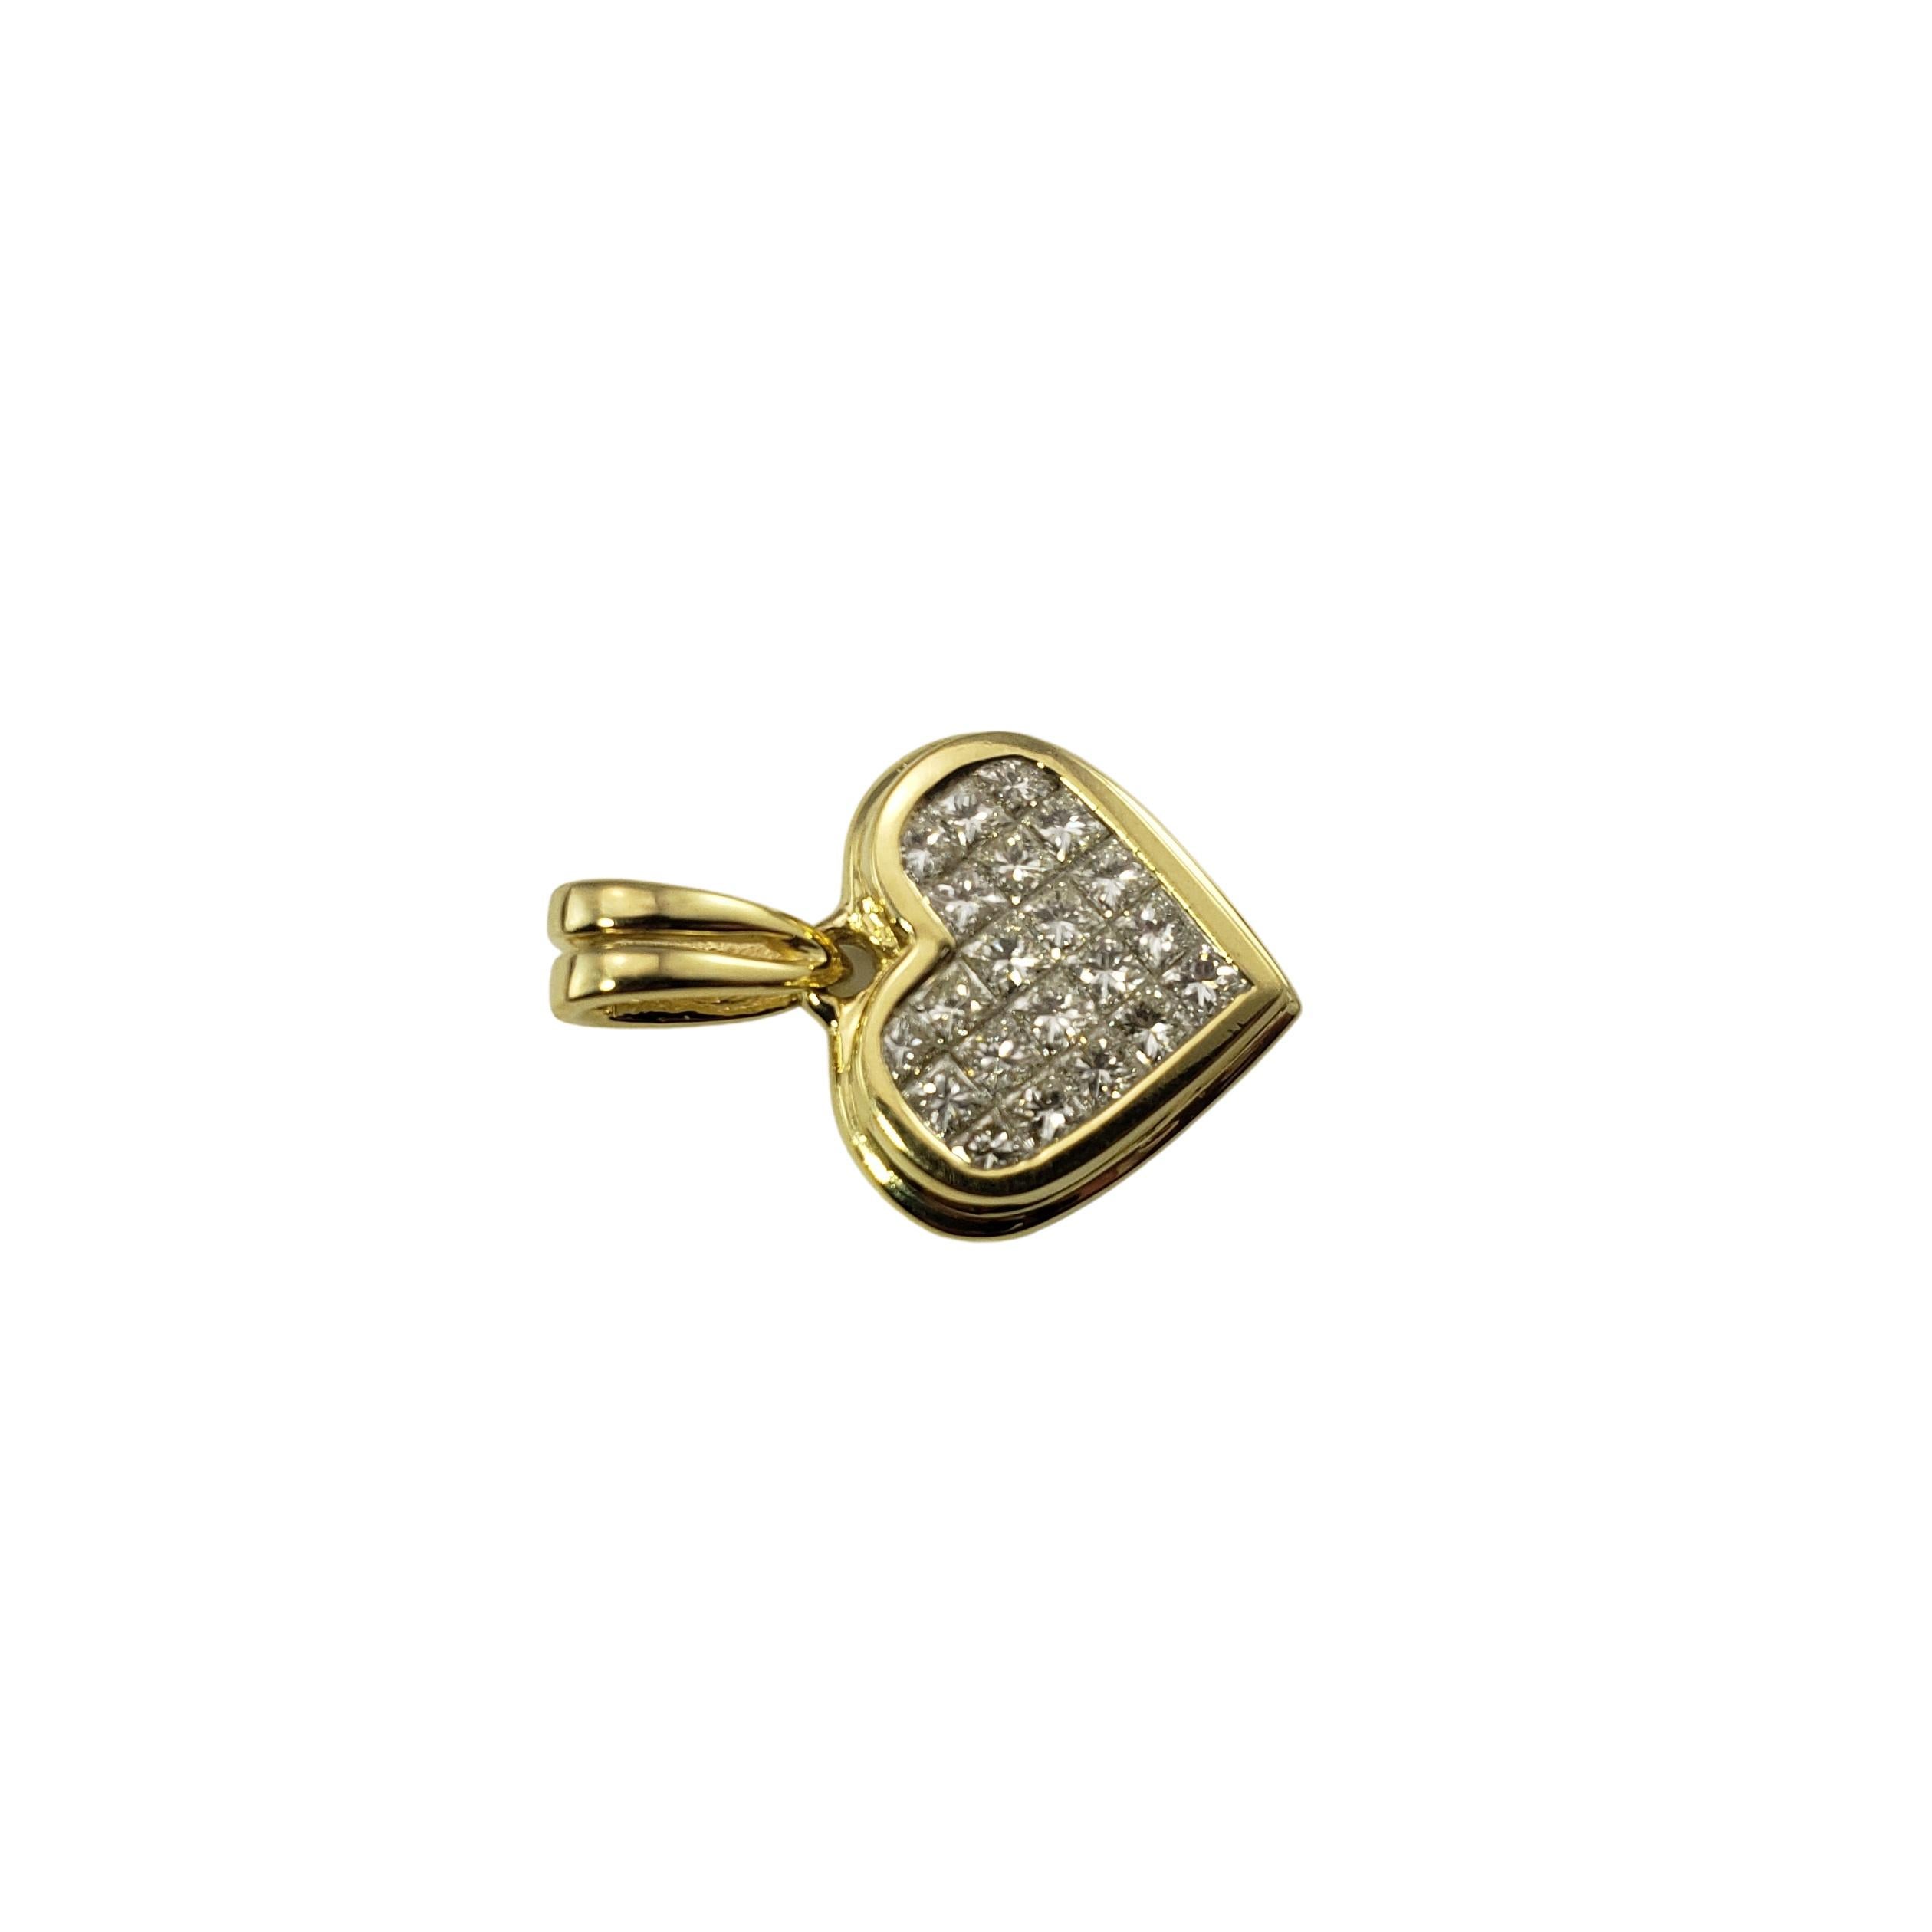 14 Karat Yellow Gold and Diamond Heart Pendant-

This sparkling heart pendant features 21 princess cut diamonds set in classic 14K yellow gold.

Approximate total diamond weight:  1.0 ct.

Diamond color: G

Diamond clarity: VS1

Size:  16 mm x 15